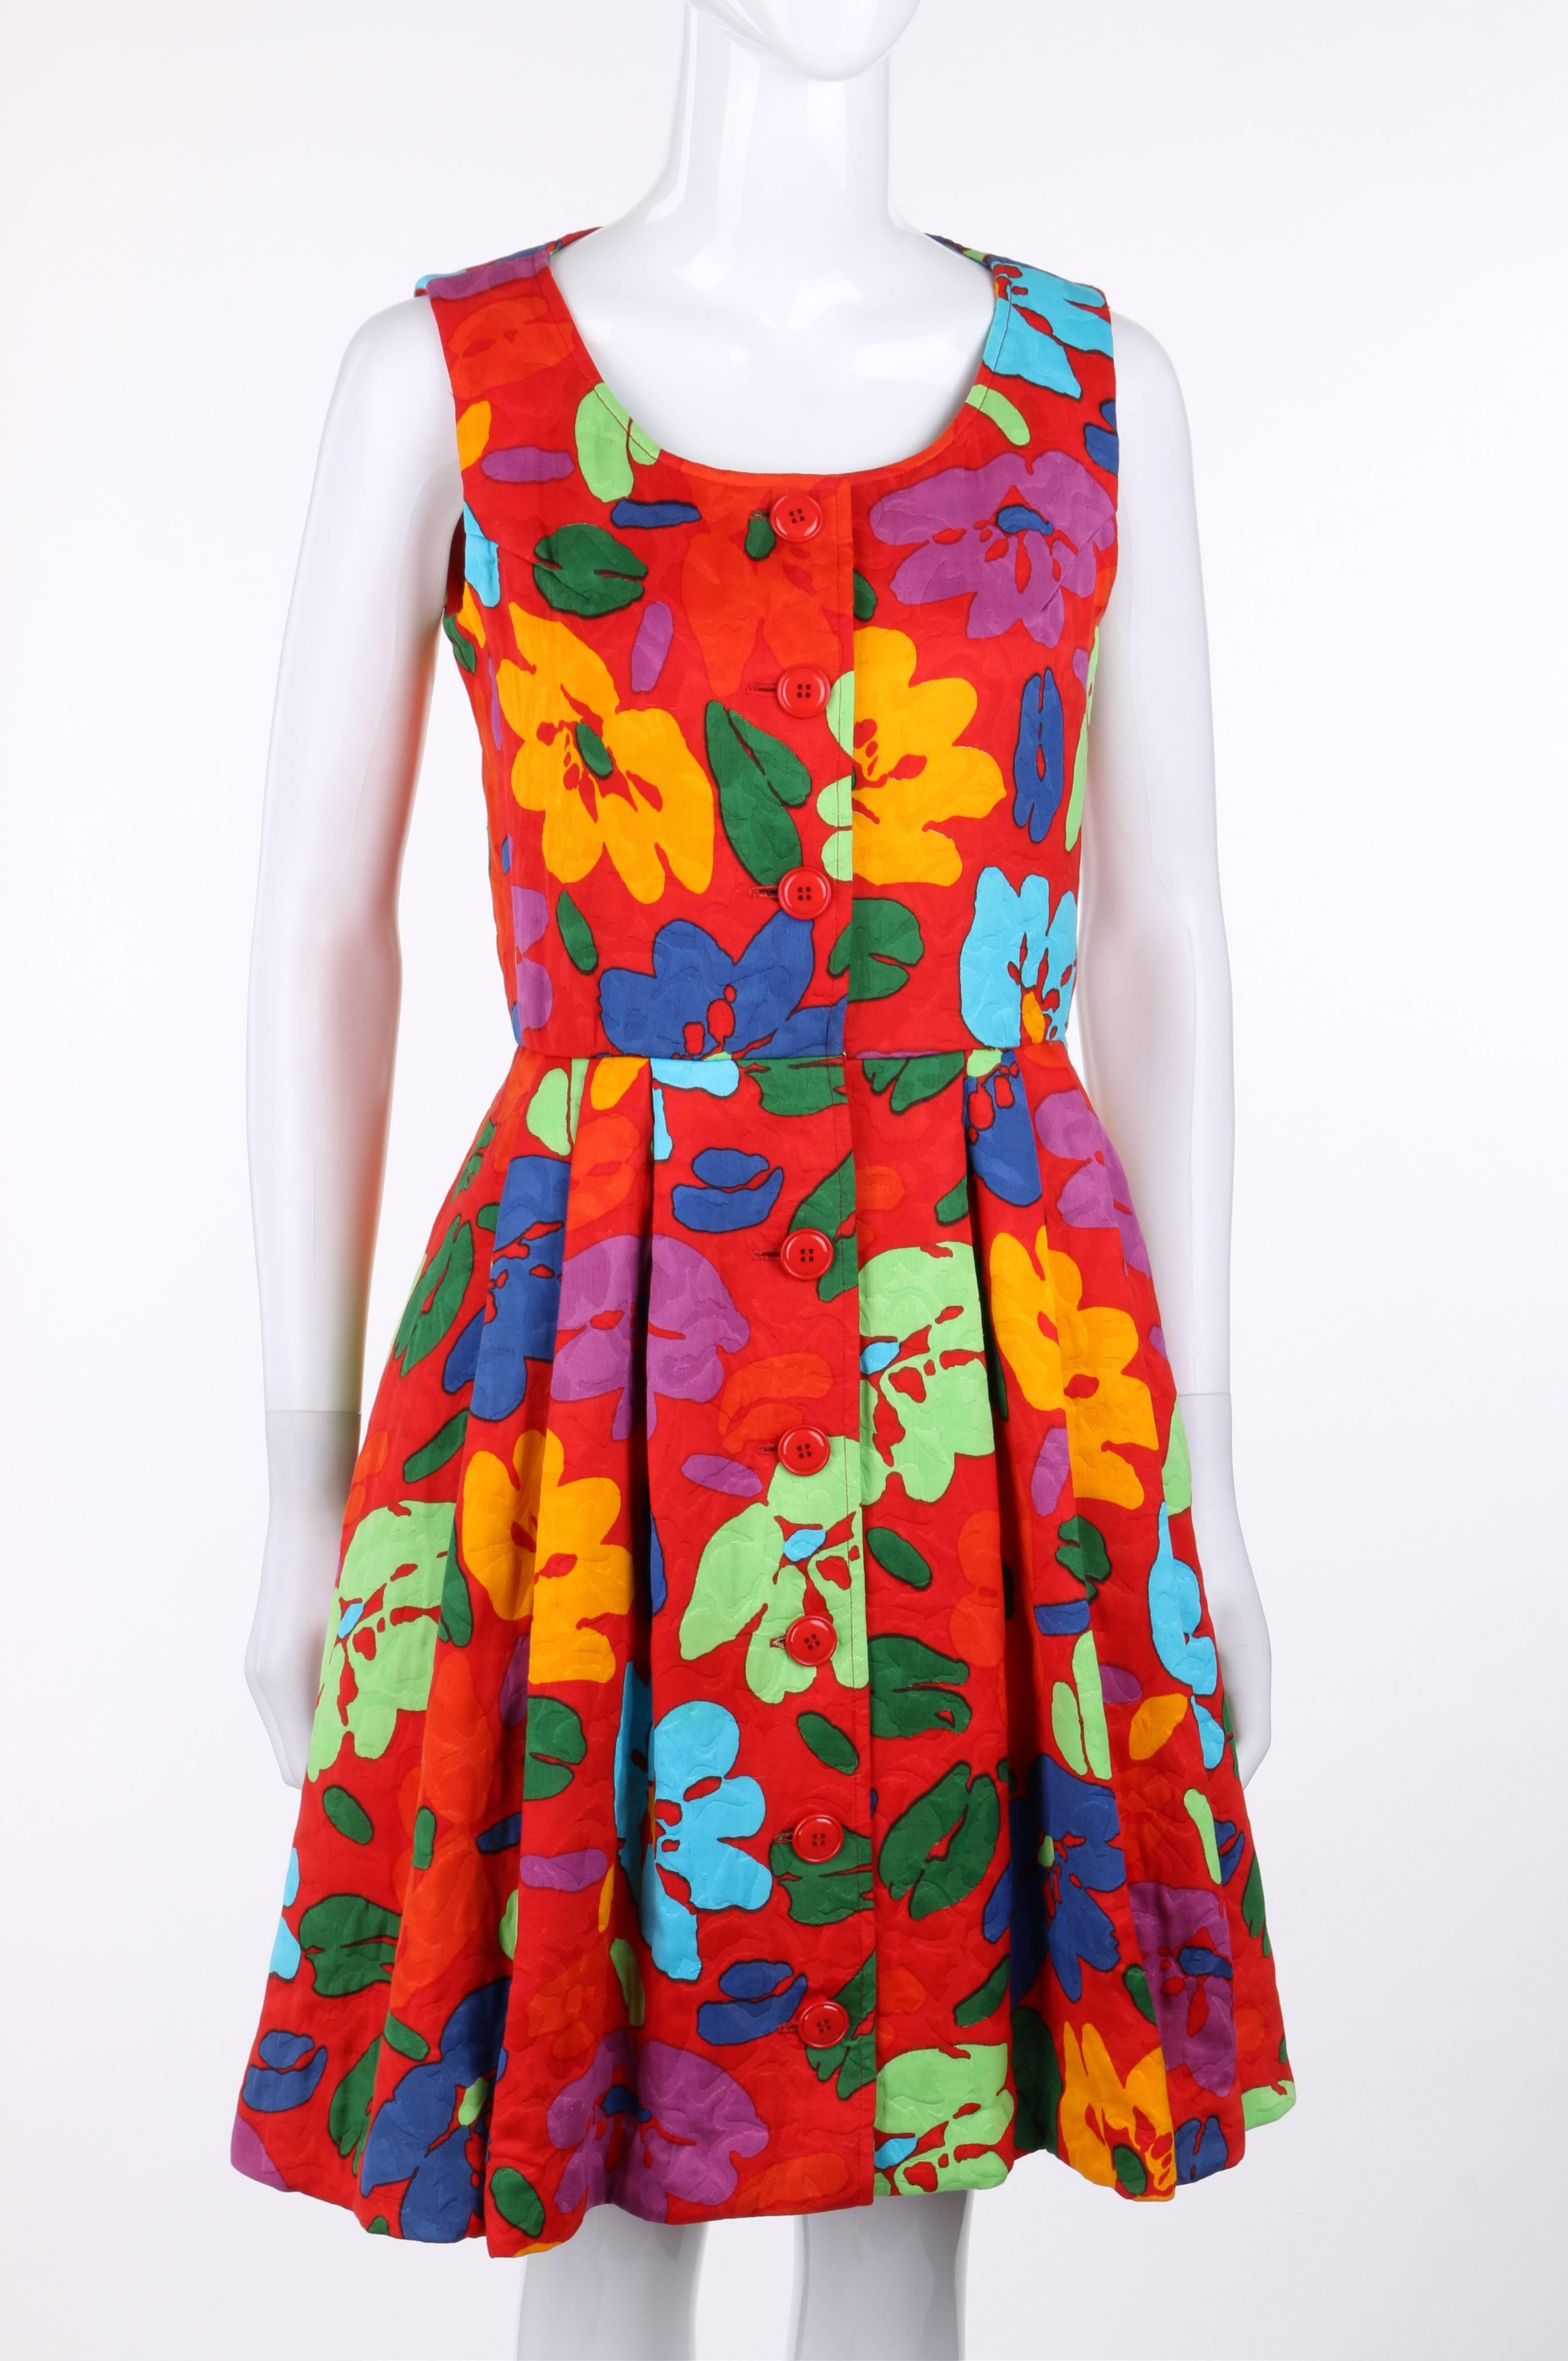 Oscar de la Renta c.1990's red multicolor floral print sleeveless dress in shades of orange, green, blue, and purple. Eight center front button closures with single hook and eye closure at waist. Scoop neckline. Knife pleated skirt. Two front inseam